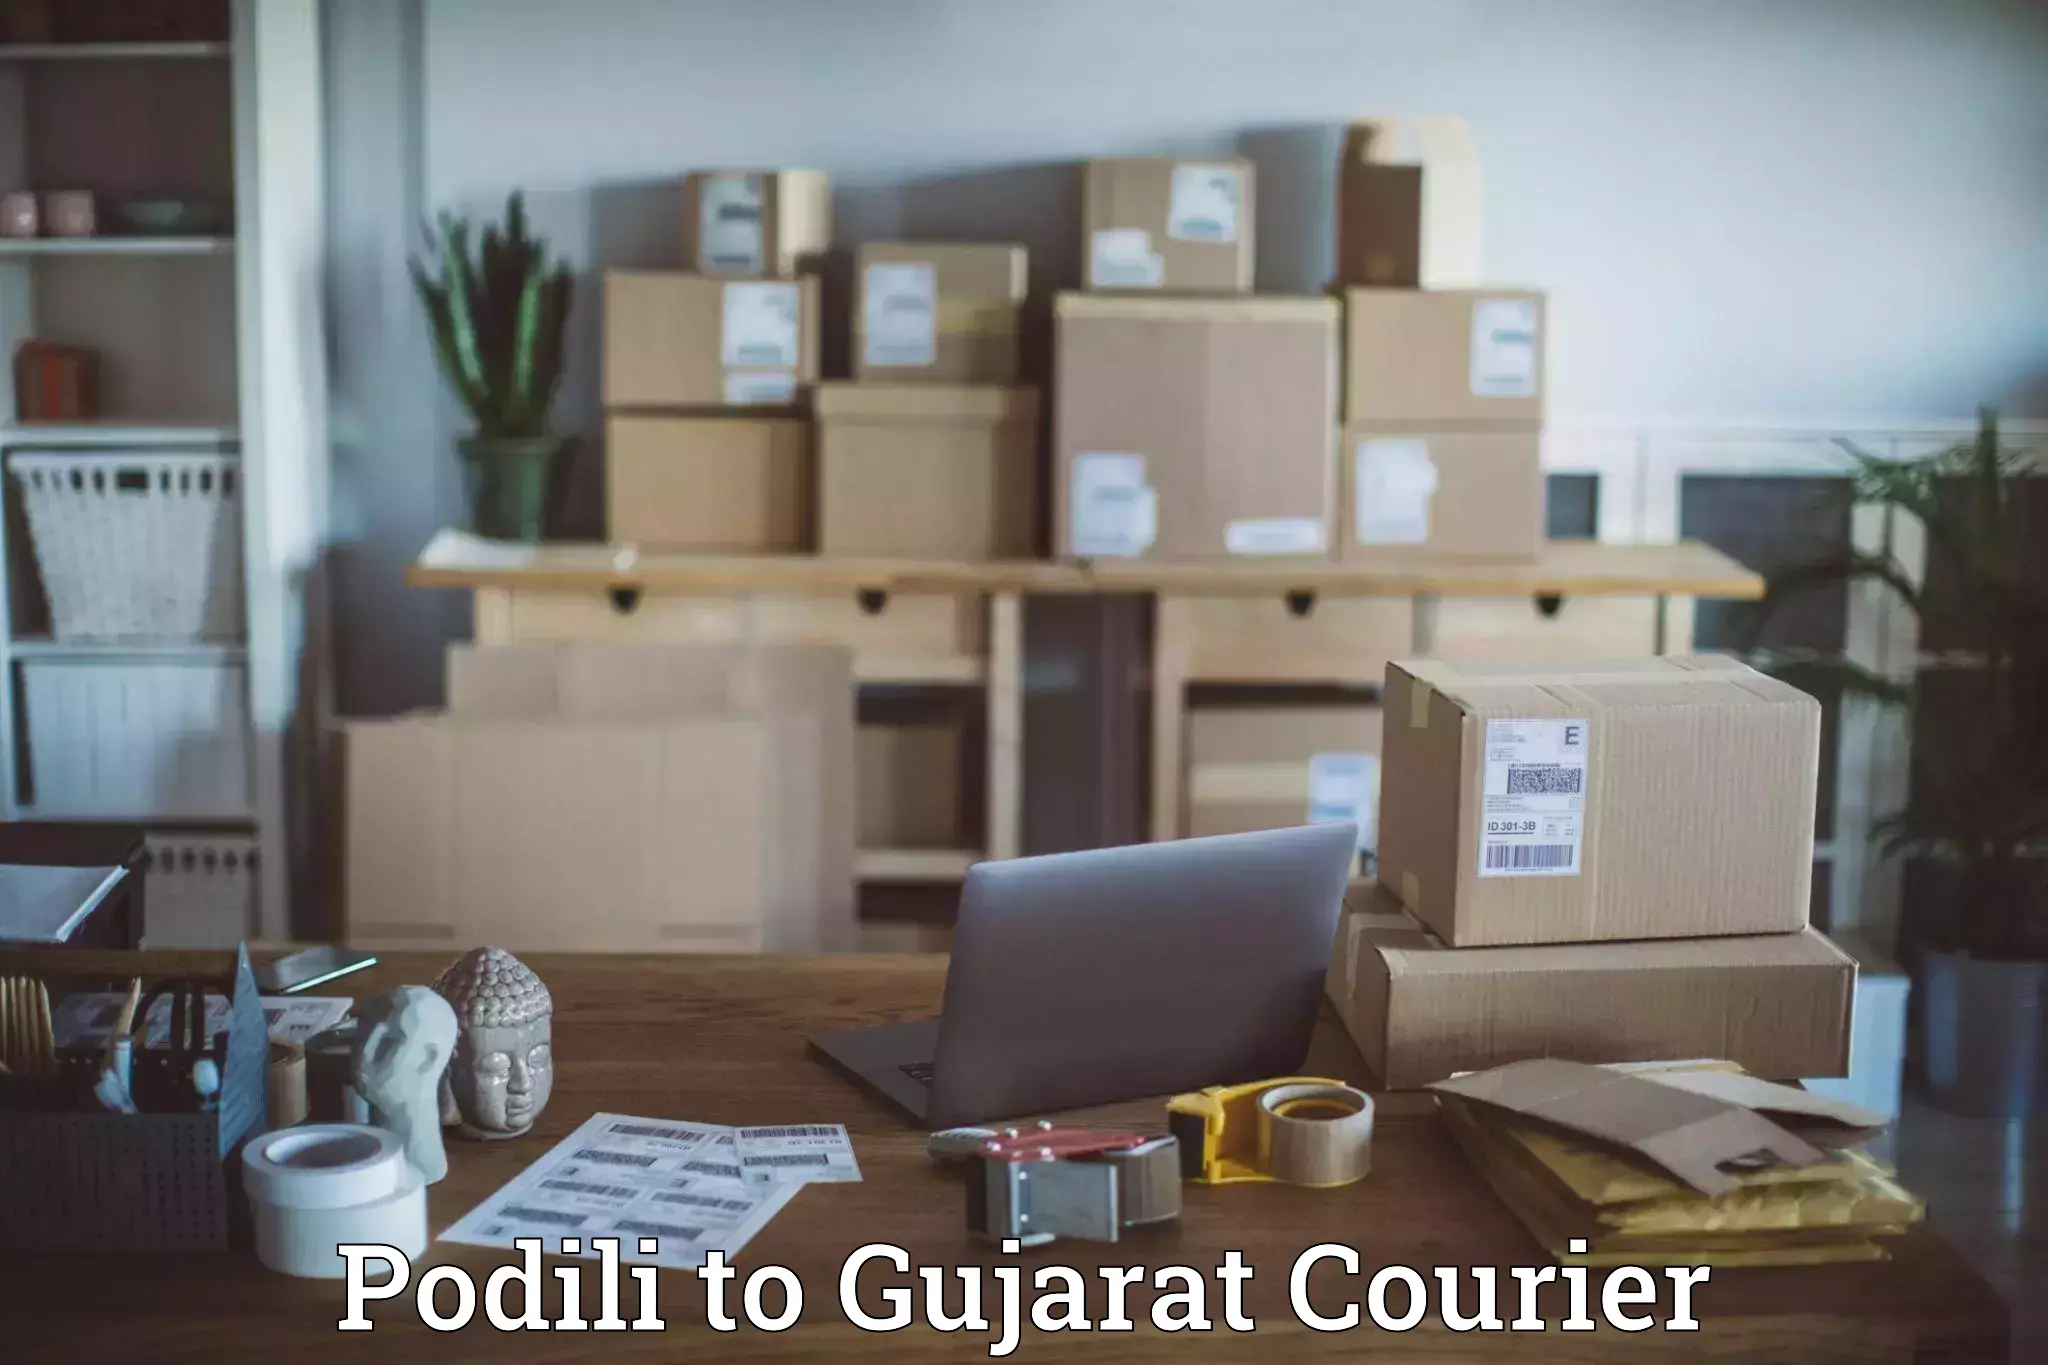 Global shipping networks in Podili to Ankleshwar